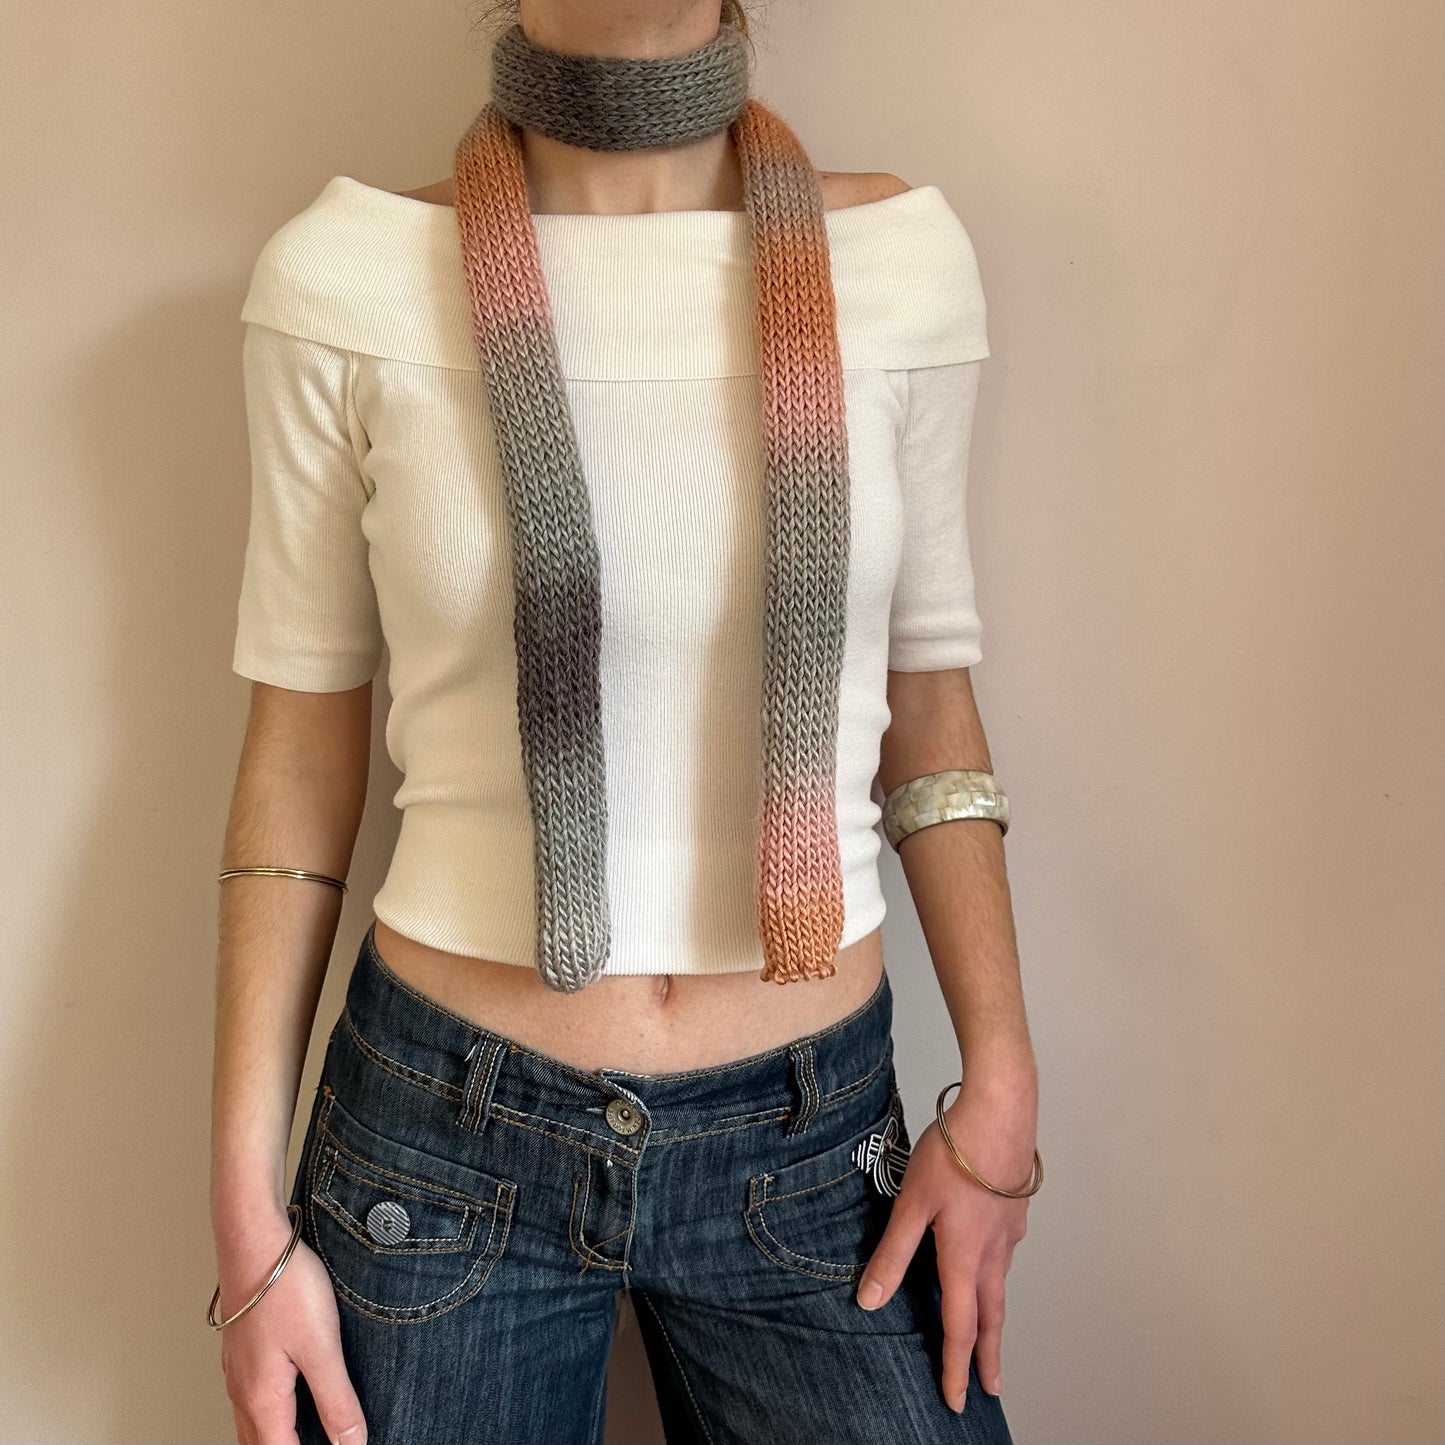 Handmade knitted ombré skinny scarf  in grey and salmon pink